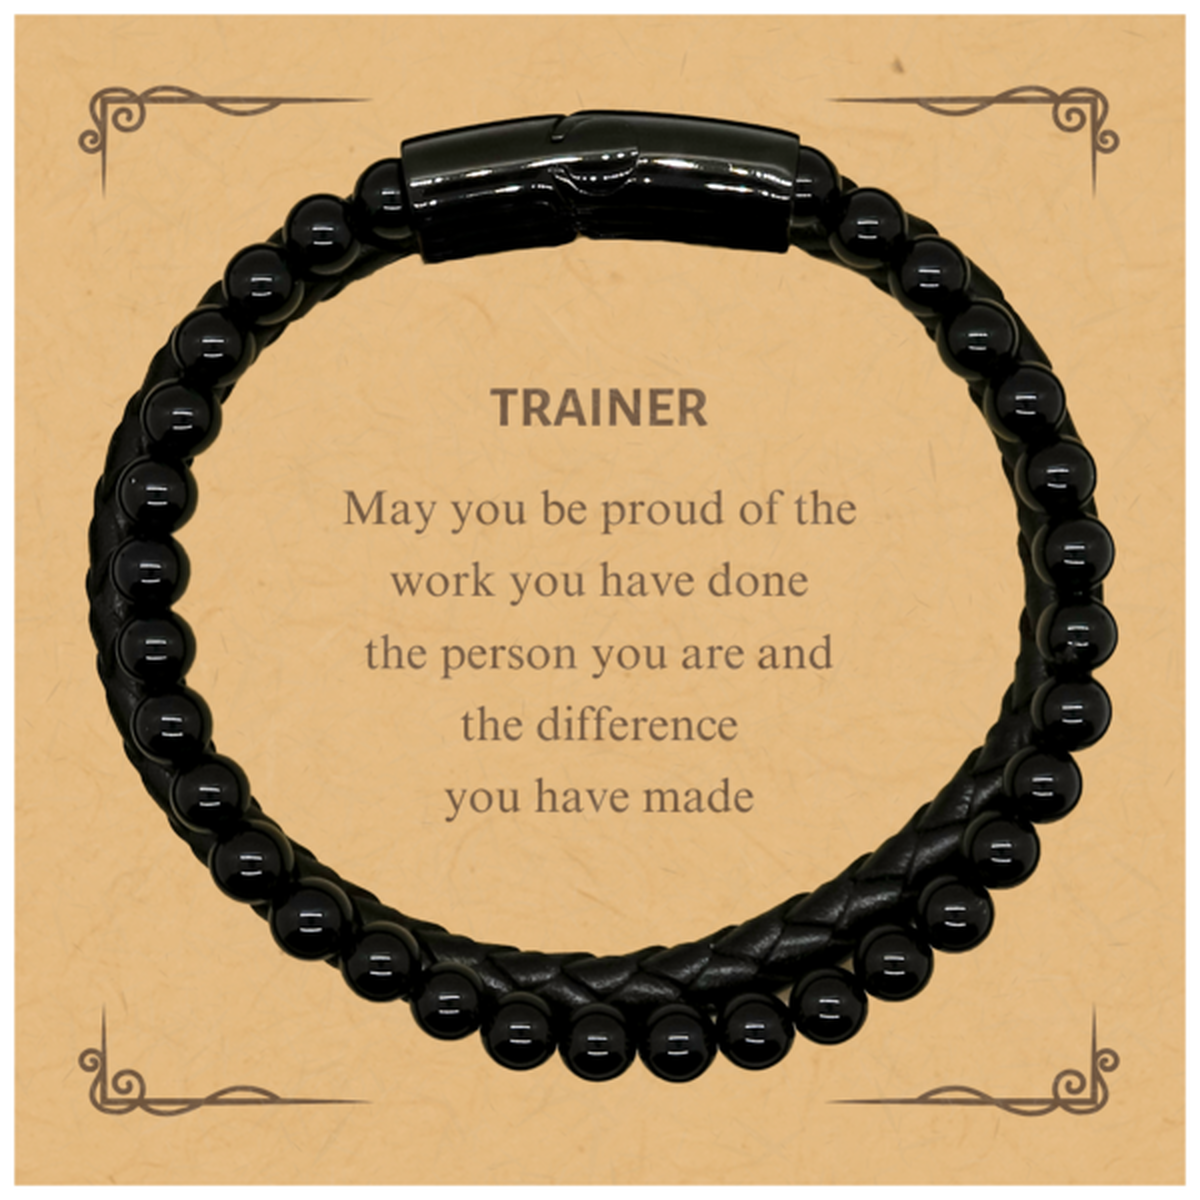 Trainer May you be proud of the work you have done, Retirement Trainer Stone Leather Bracelets for Colleague Appreciation Gifts Amazing for Trainer